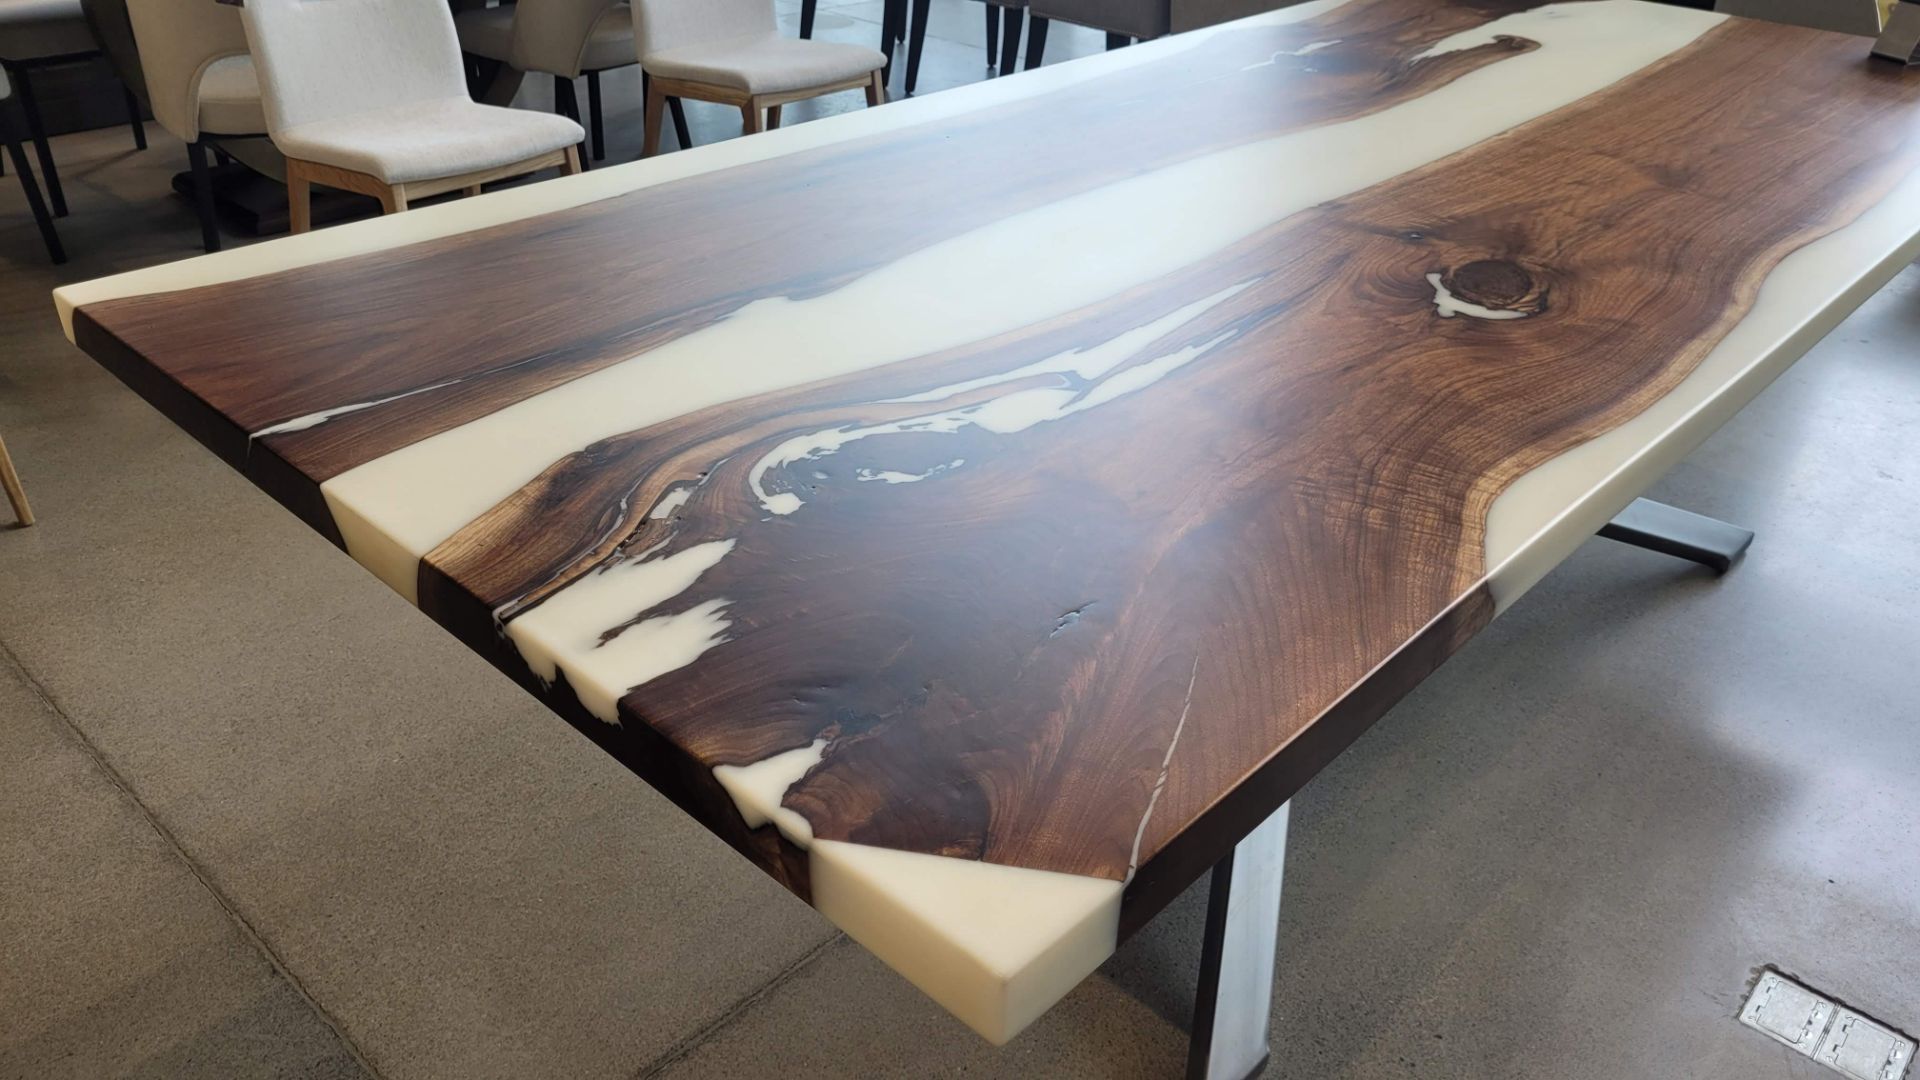 POURED EPOXY TWO SLAB LIVE EDGE DINING TABLE, 48" X 108" X 1 3/4", THICK SOLID TOP - MSRP $43,244.00 - Image 4 of 7